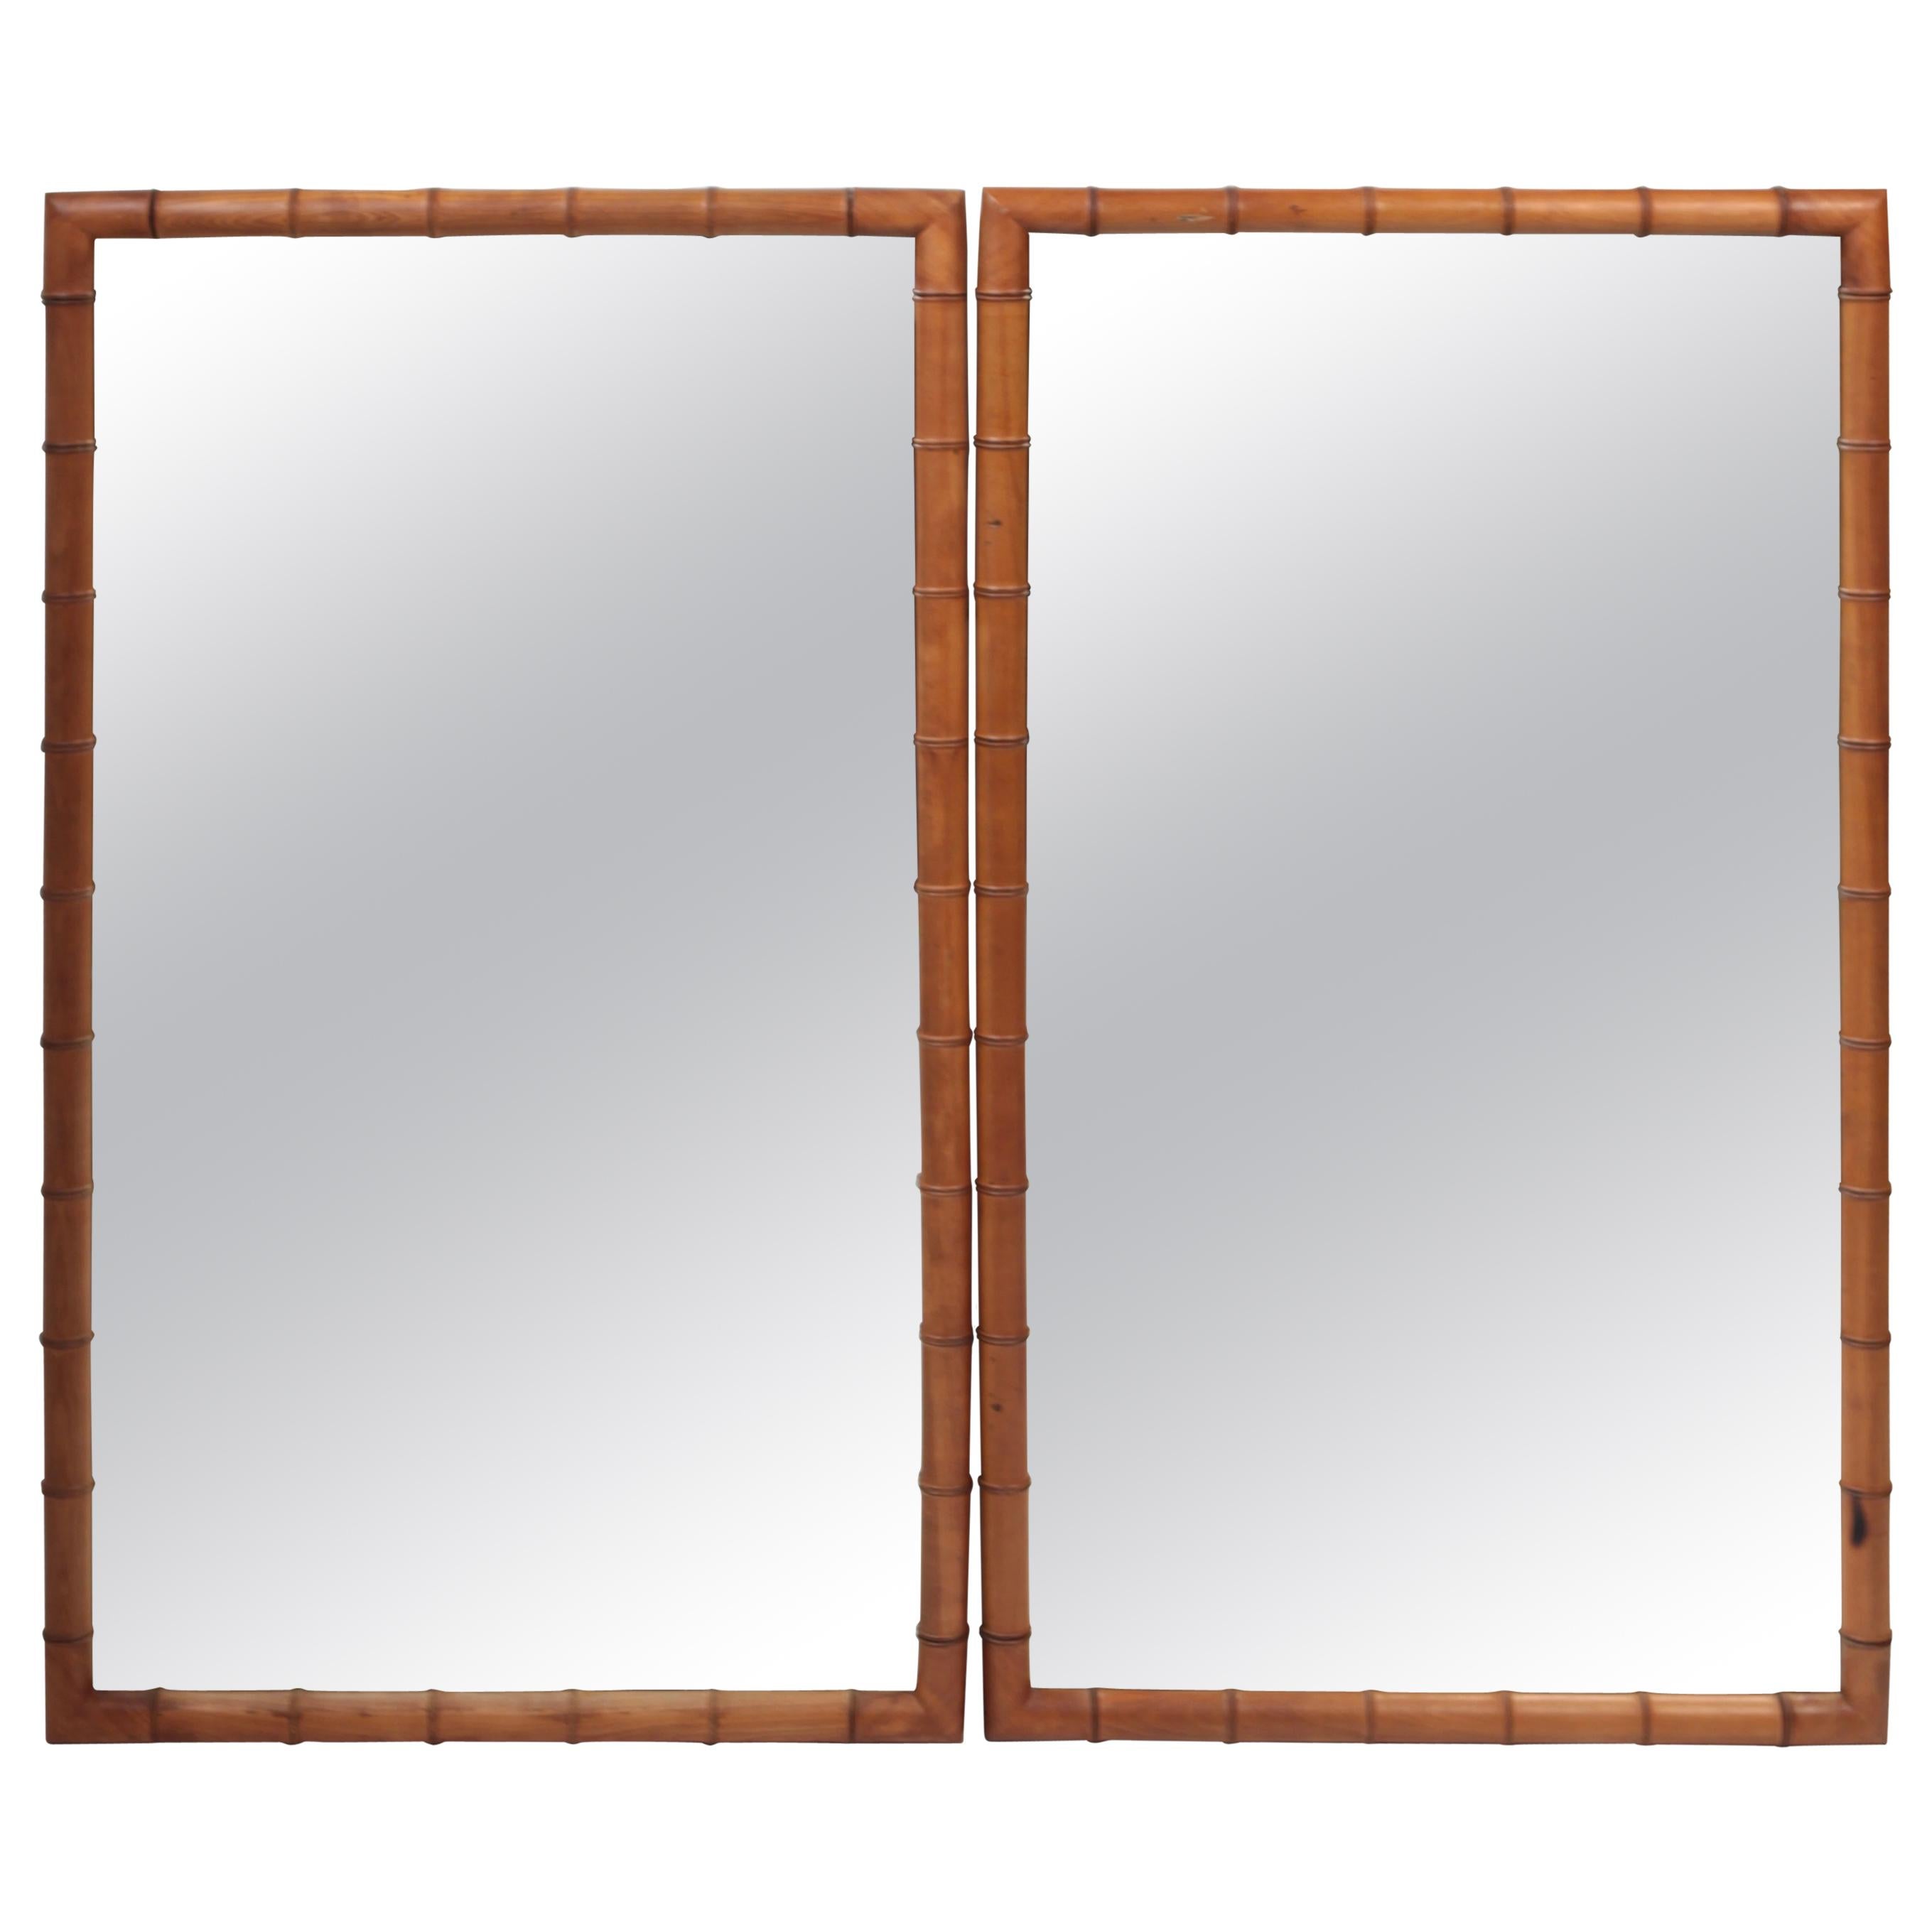 Pair of French Faux Bamboo Mirrors in Walnut, France, circa 1890